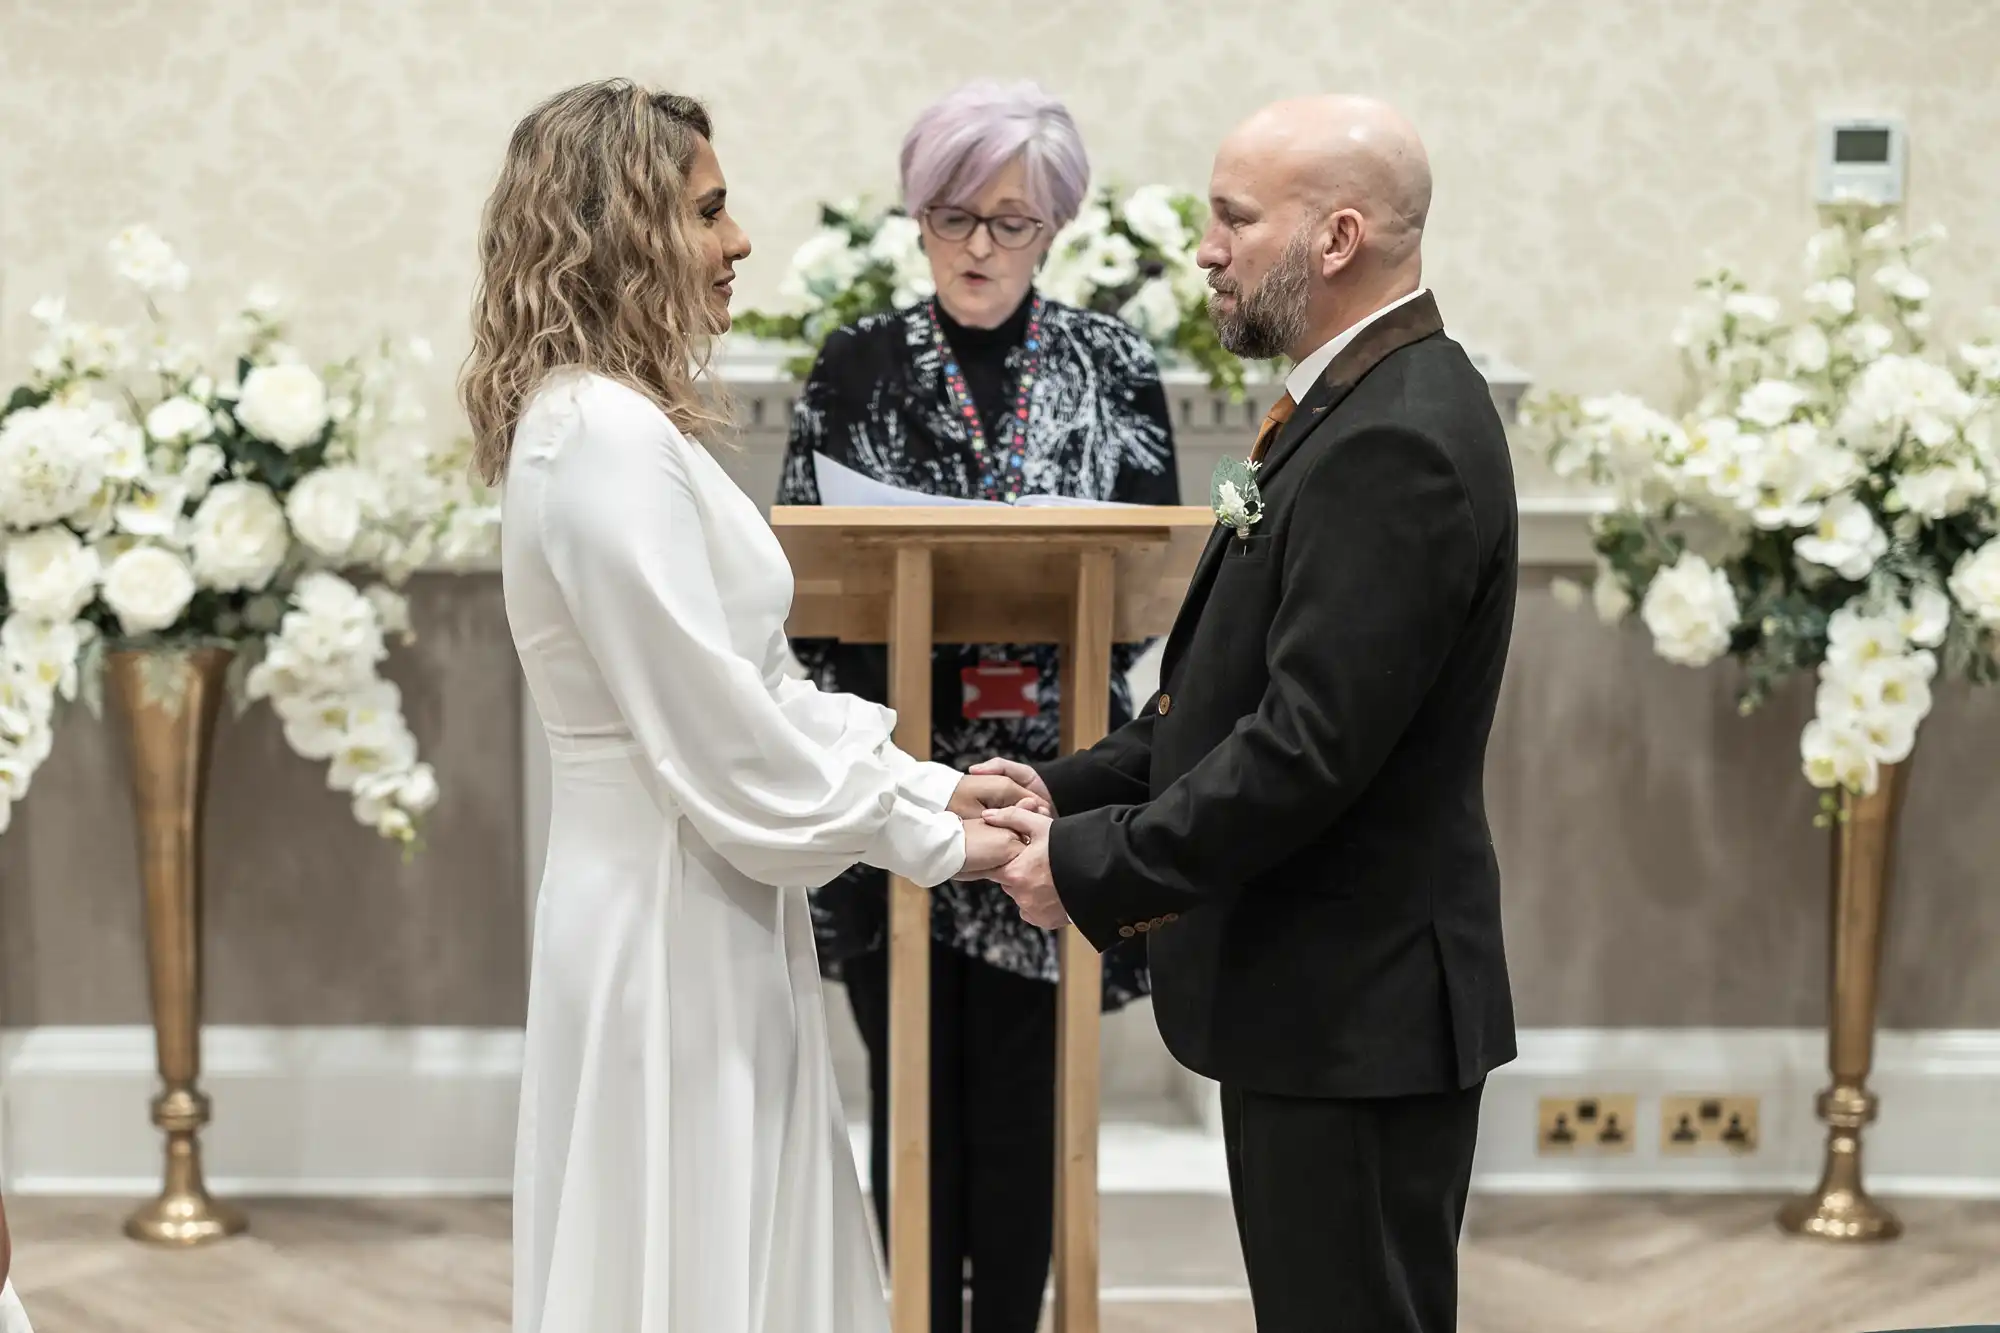 A couple stands facing each other, holding hands, during a wedding ceremony. A person officiates behind them, with arrangements of white flowers on either side.